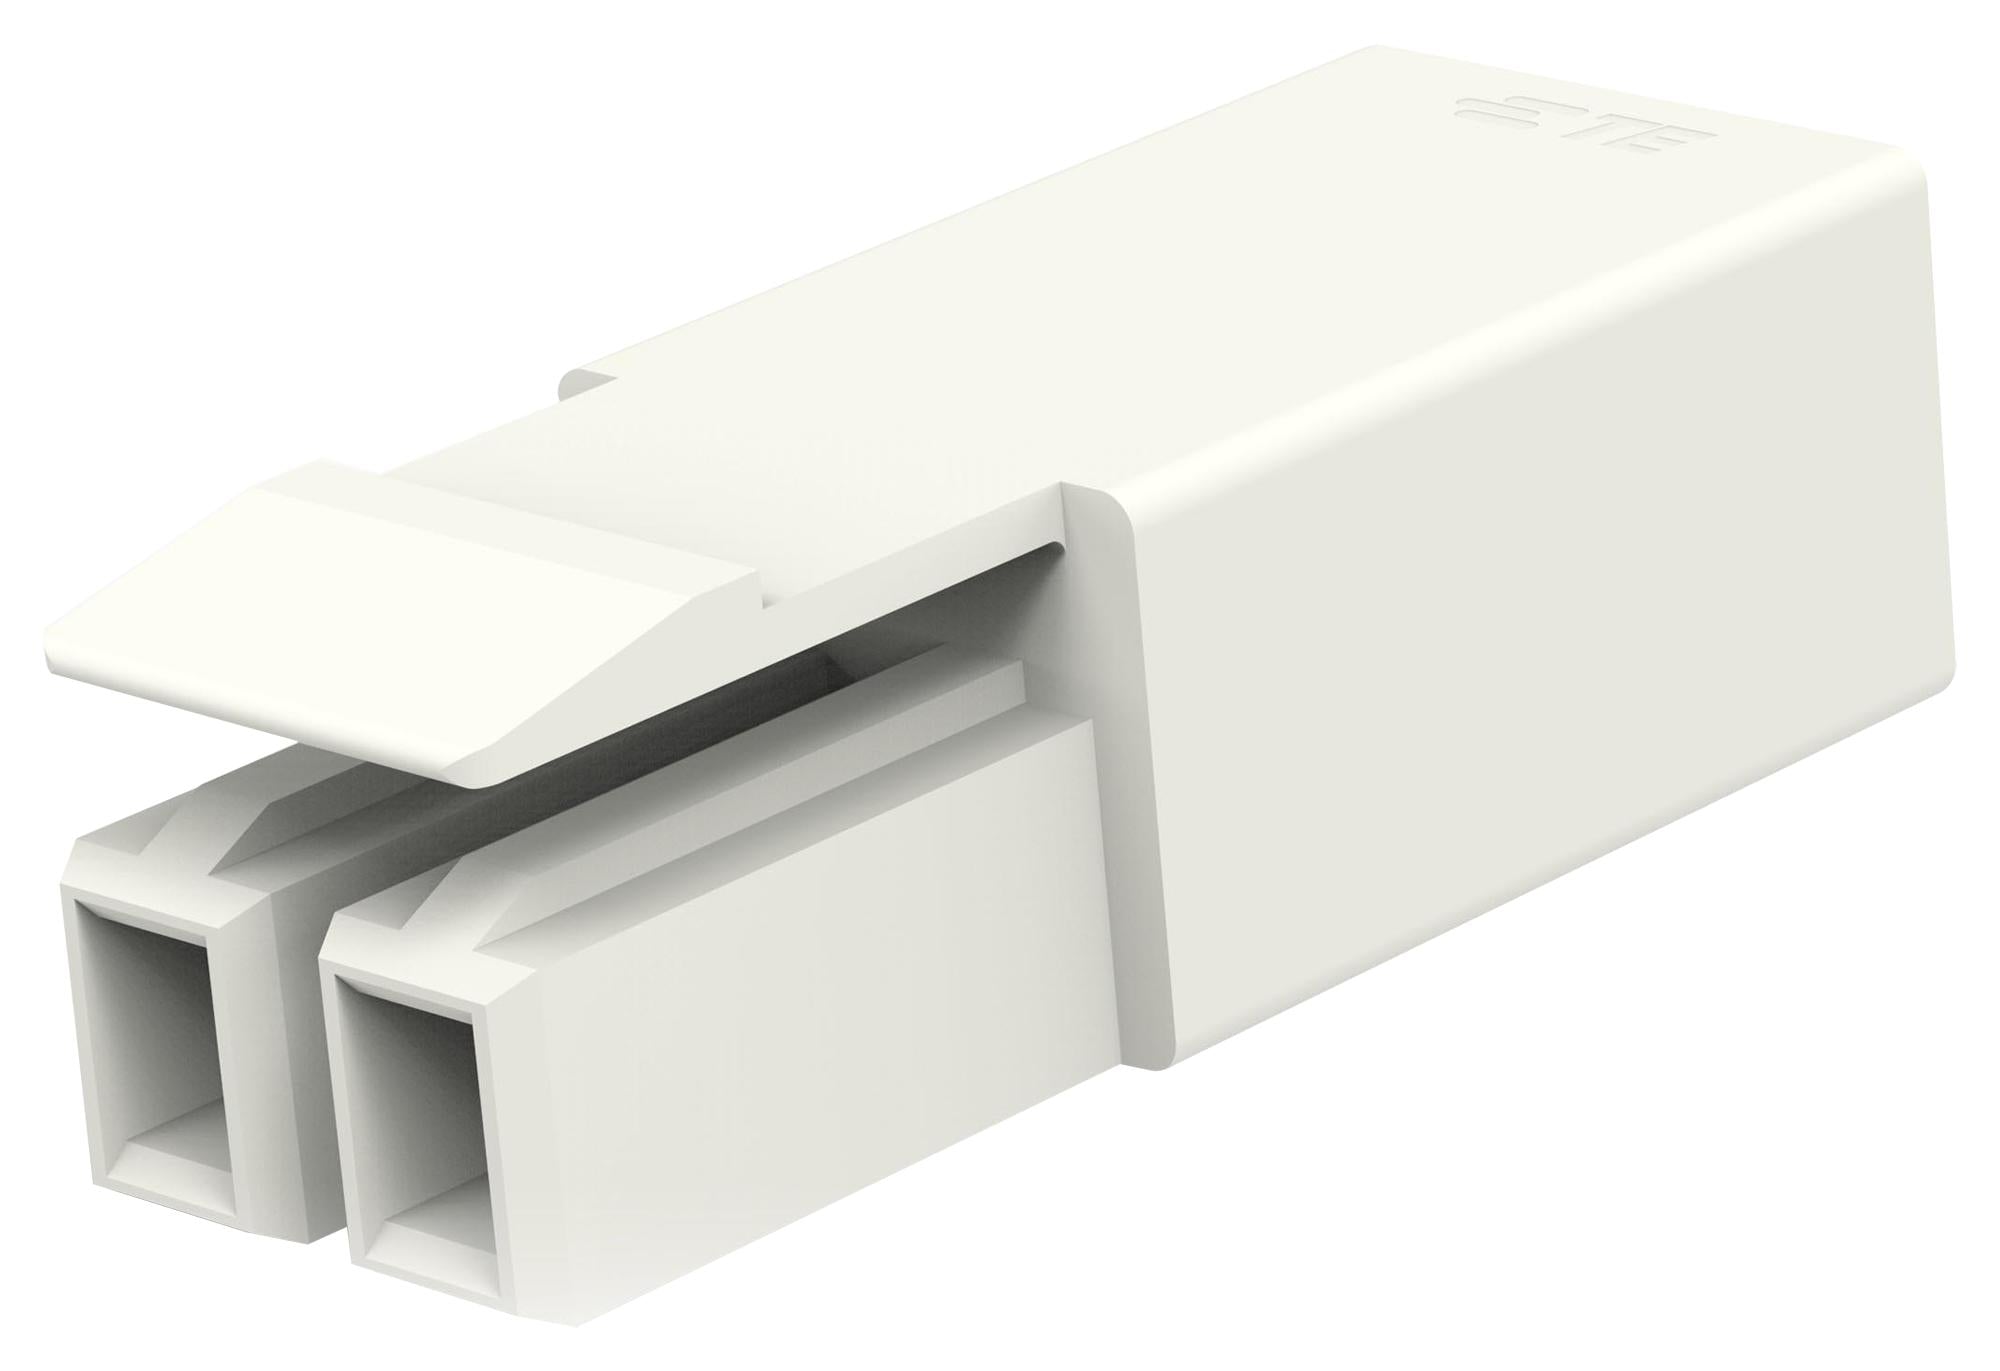 2834048-1 CONNECTOR, PLUG, POKE-IN, 2POS, 4.5MM TE CONNECTIVITY